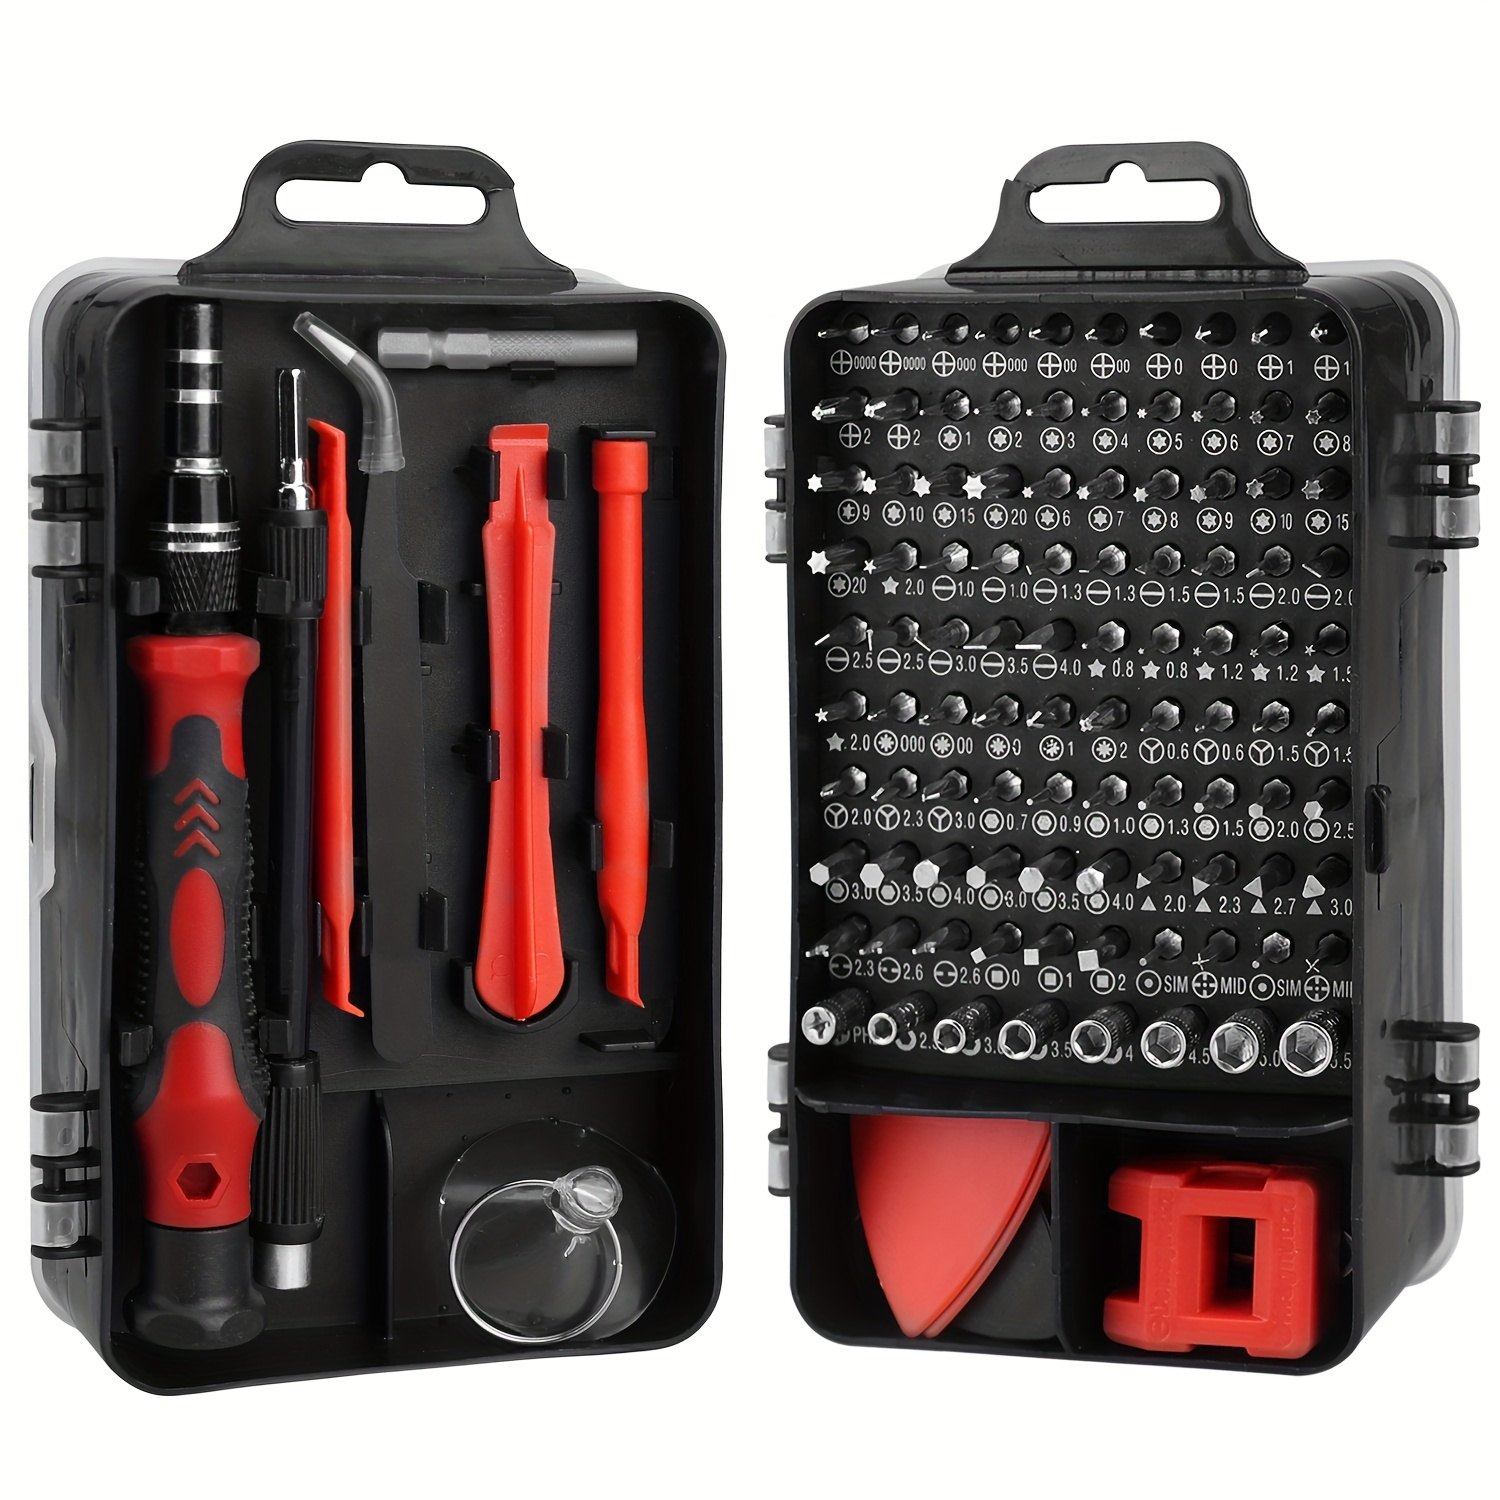 

115-in-1 Precision Screwdriver Set - Versatile Tools For Electronics | Ideal For Cell Phones, Laptops, Cameras - Handy Repair Kit For Home & Tech Enthusiasts